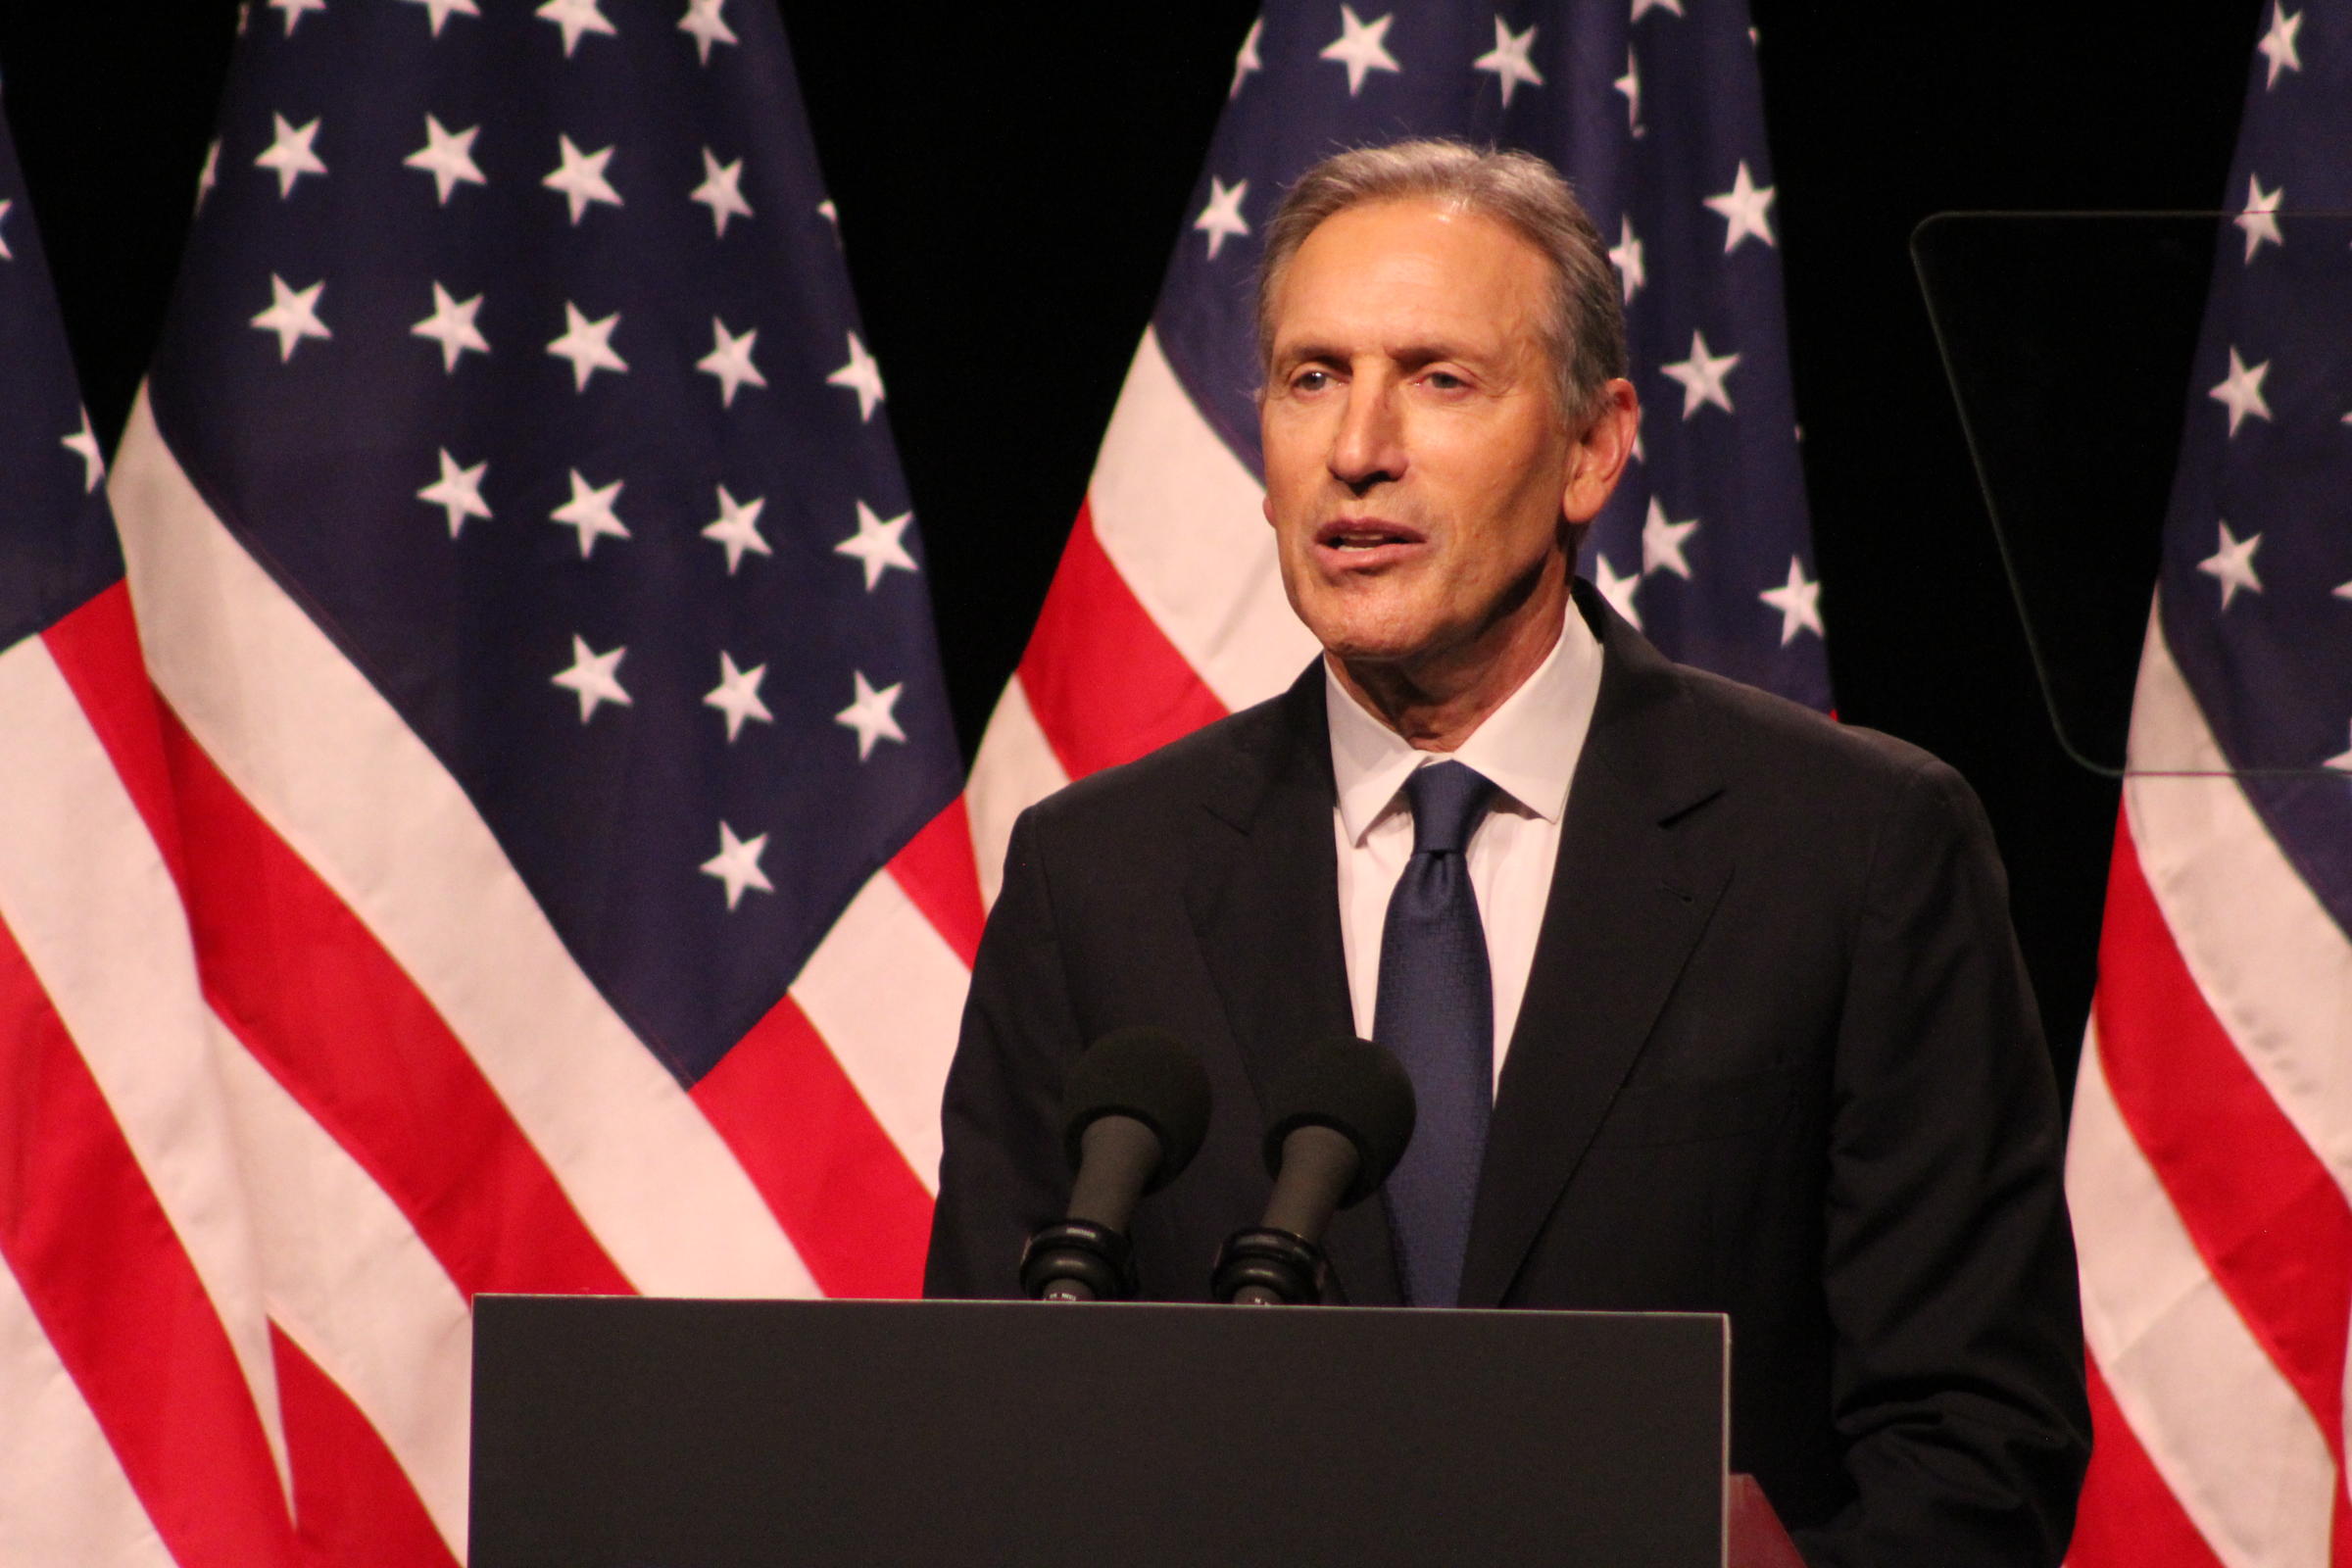 Former Starbucks Coffee CEO Howard Schultz, speaking to a crowd at Purdue University on February 7, 2019.